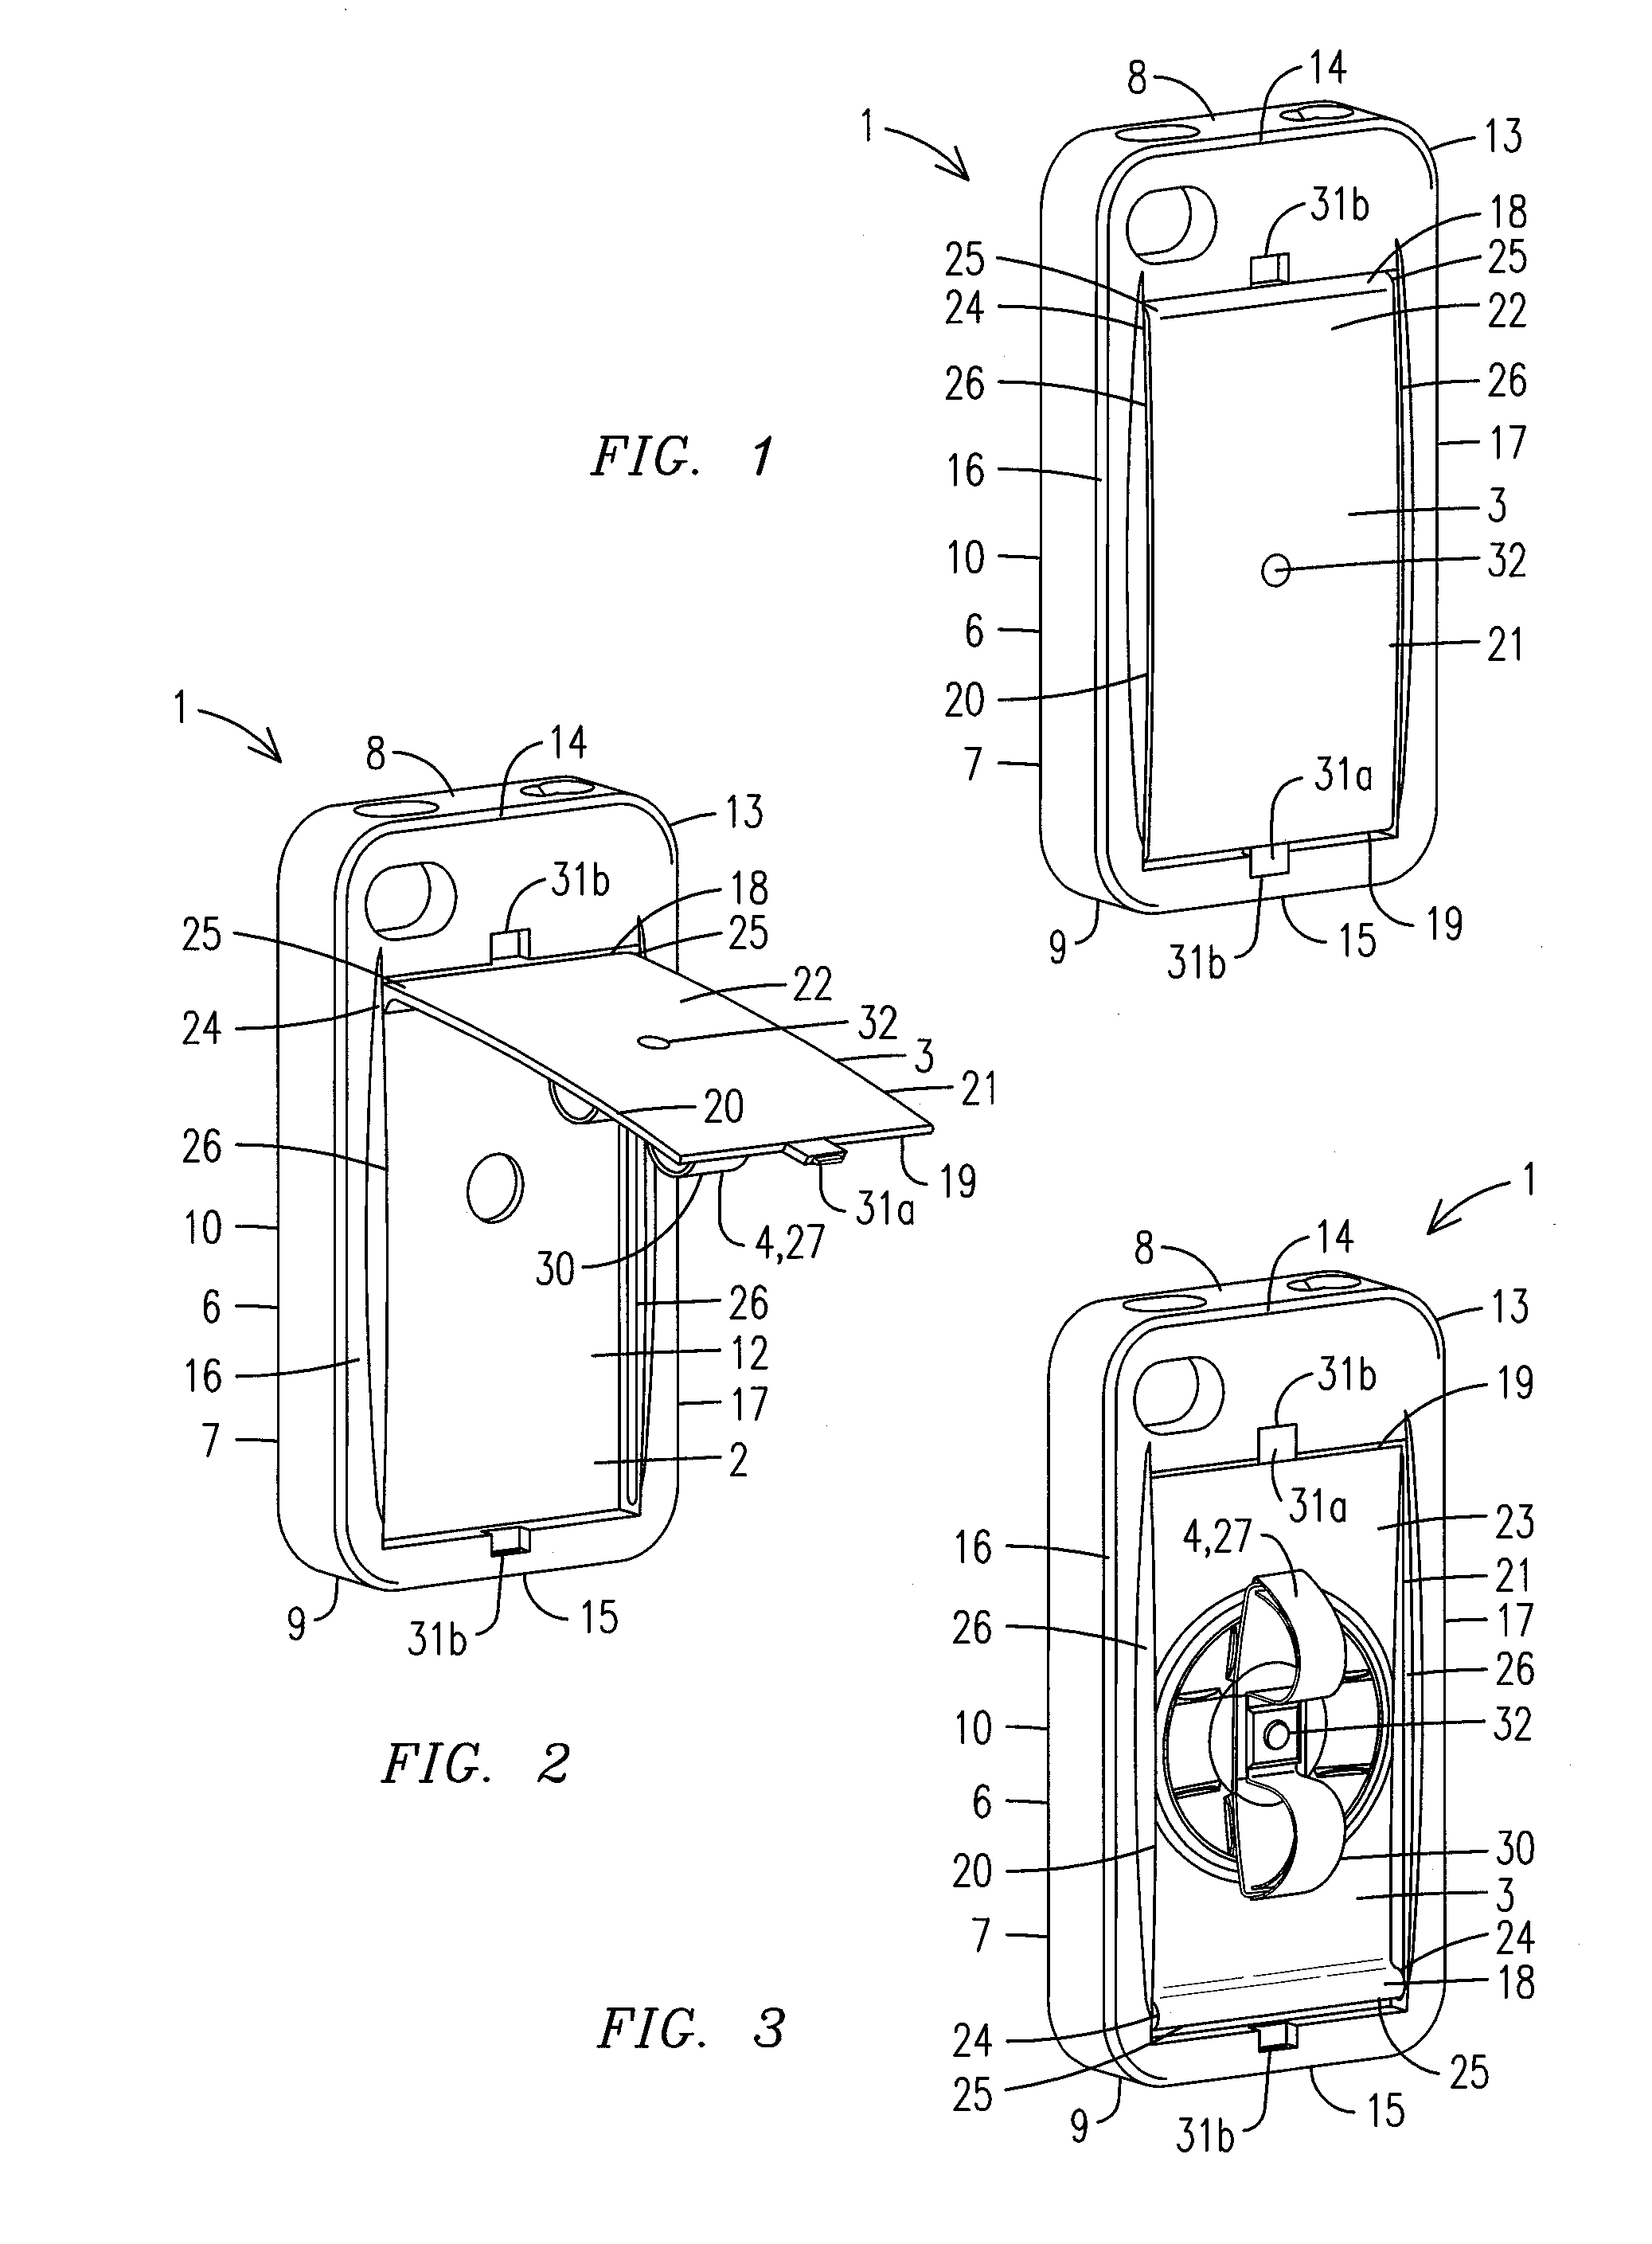 Protective case for electronic devices